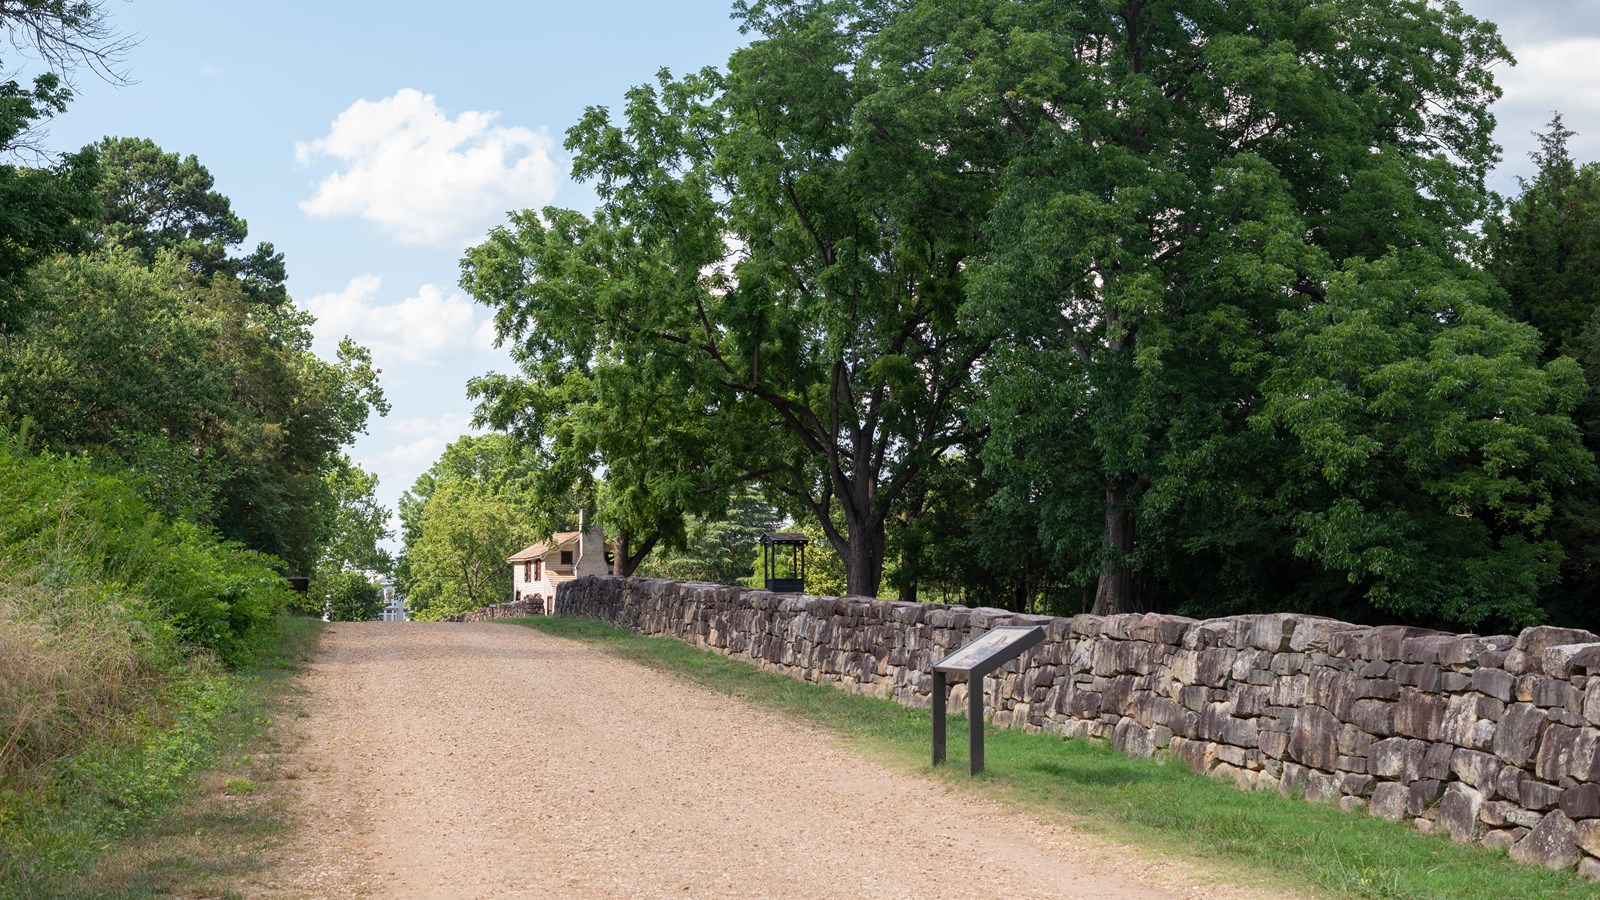 A gravel road lined by a stone wall with a small, two-story white house in the background